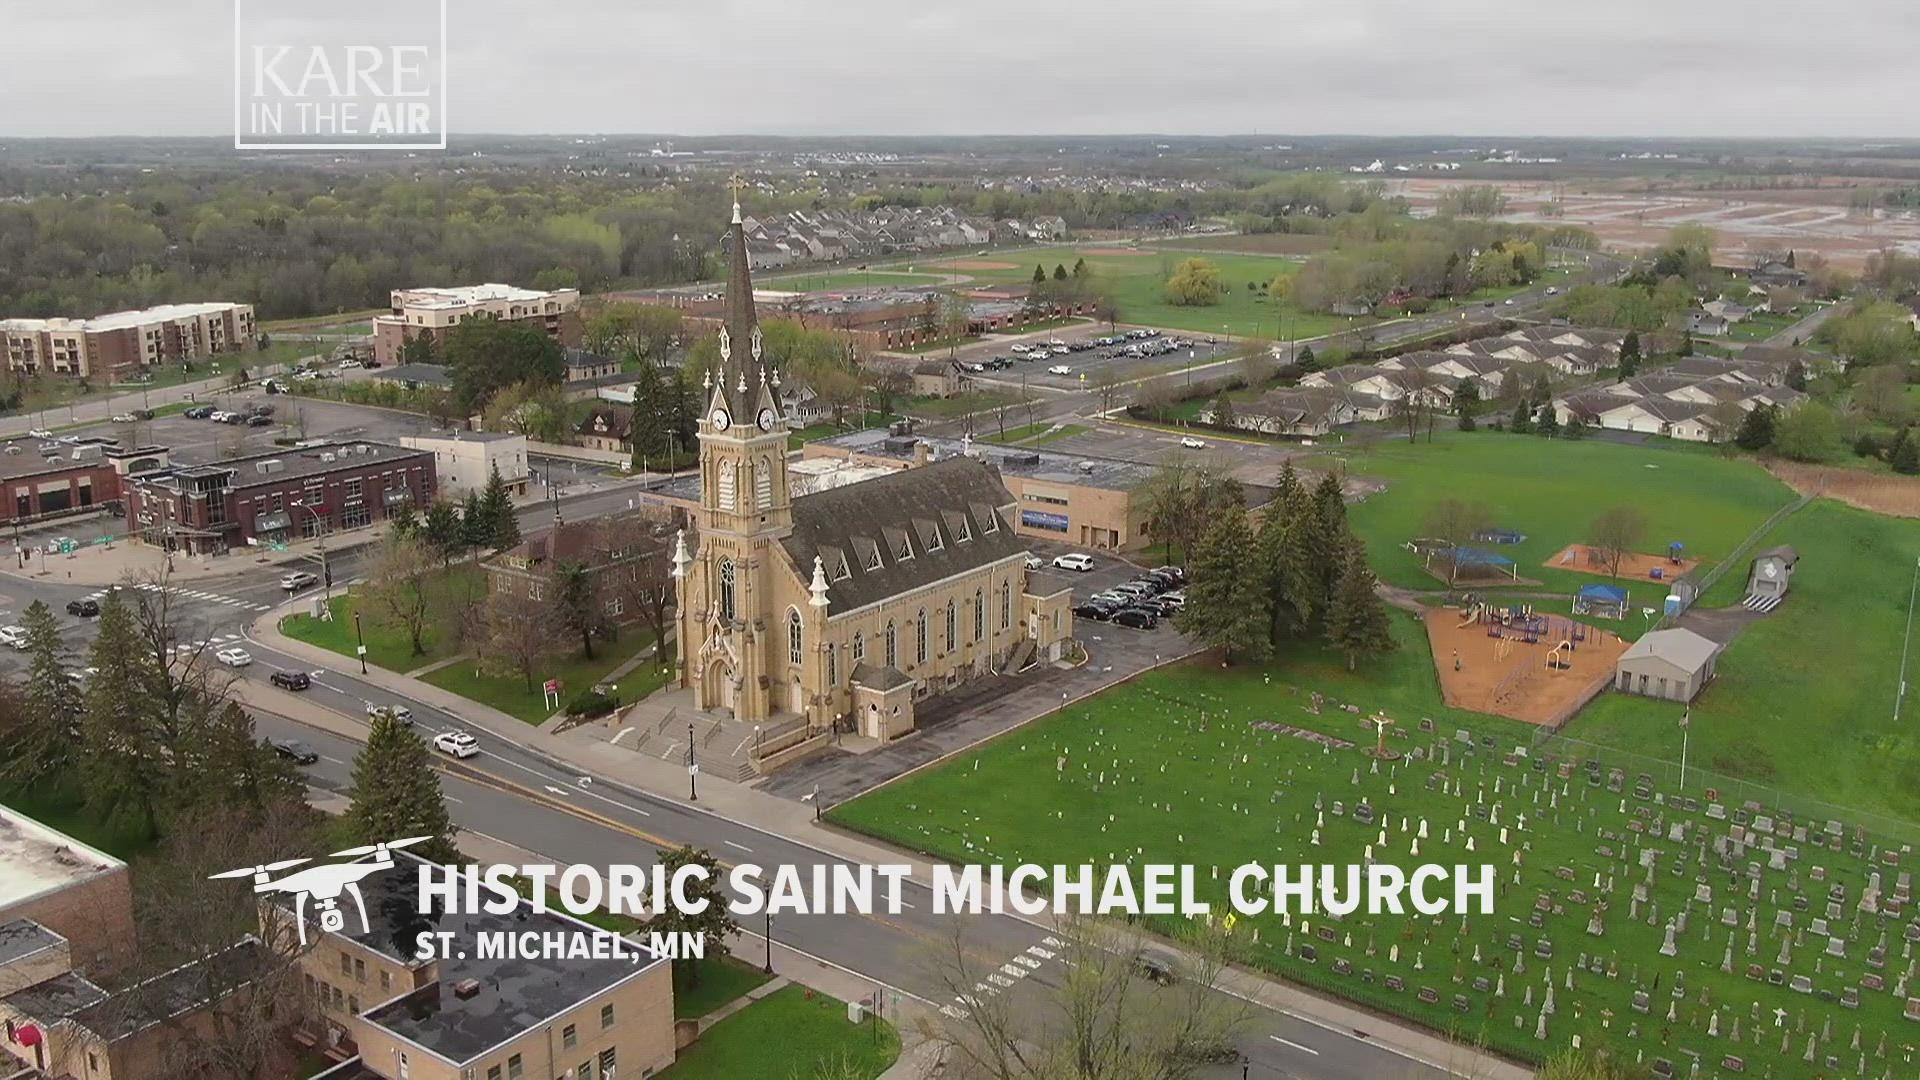 Our KARE in the Air drone tour takes us over St. Michael Historic Catholic Church, an eye-catching example of neo-gothic architecture right her in the heartland.